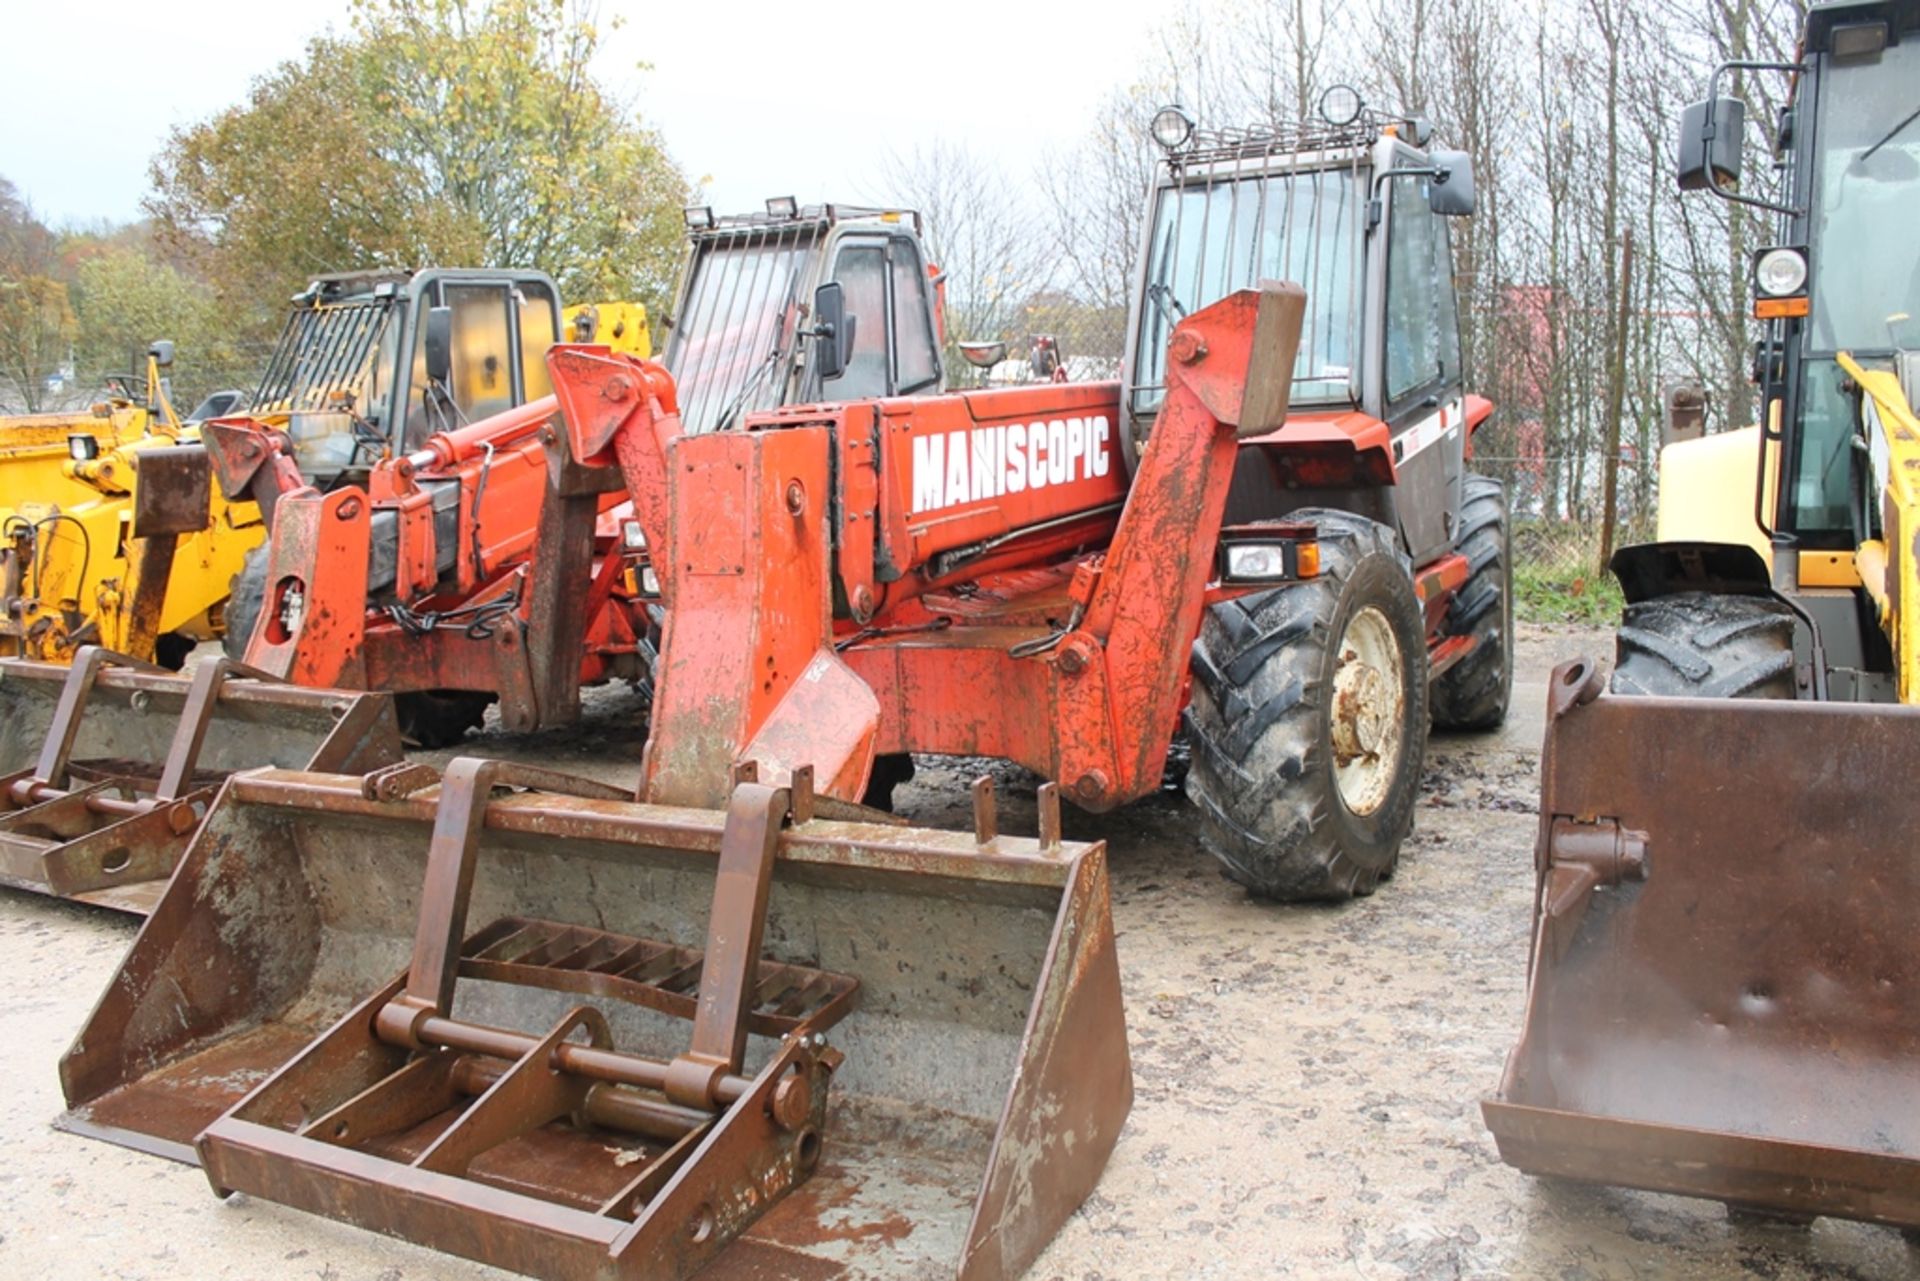 Manitou Forklift - 3990cc Tractor